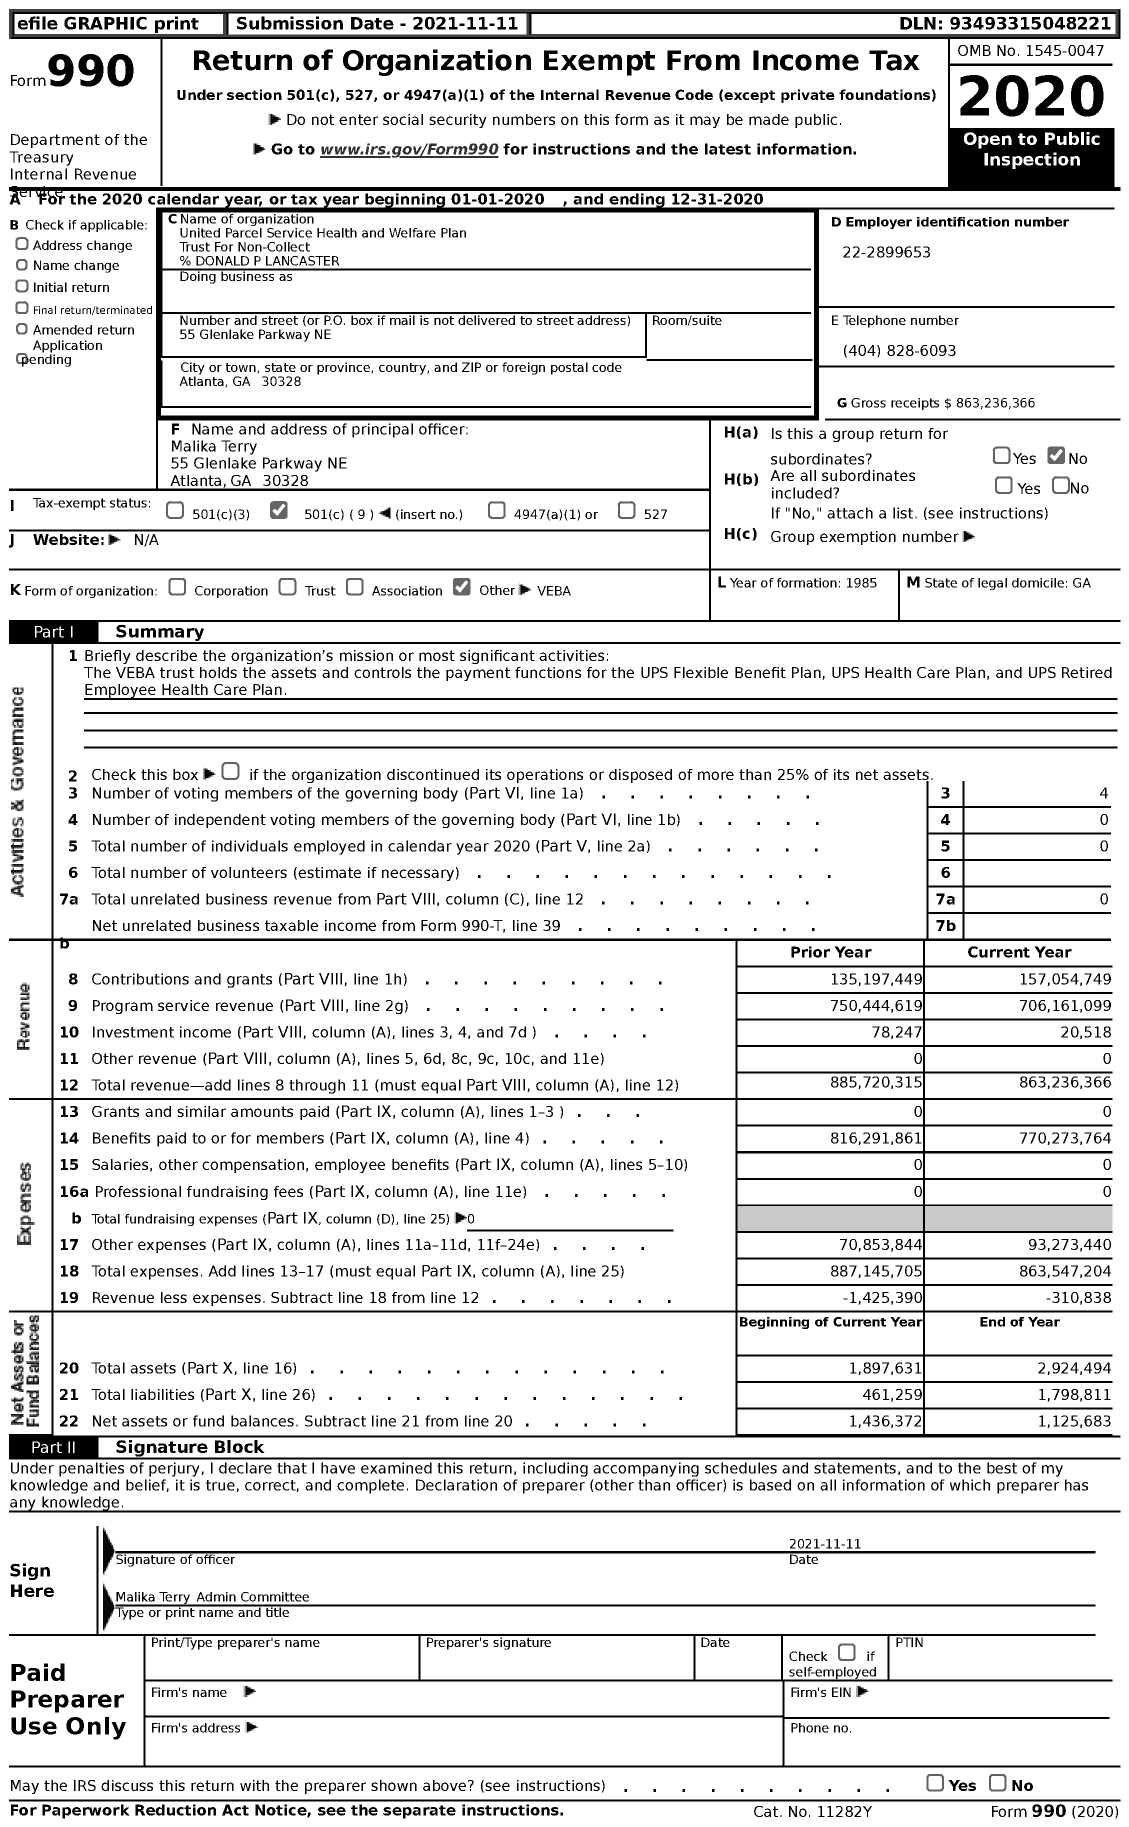 Image of first page of 2020 Form 990 for United Parcel Service Health and Welfare Plan Trust For Non-Collect